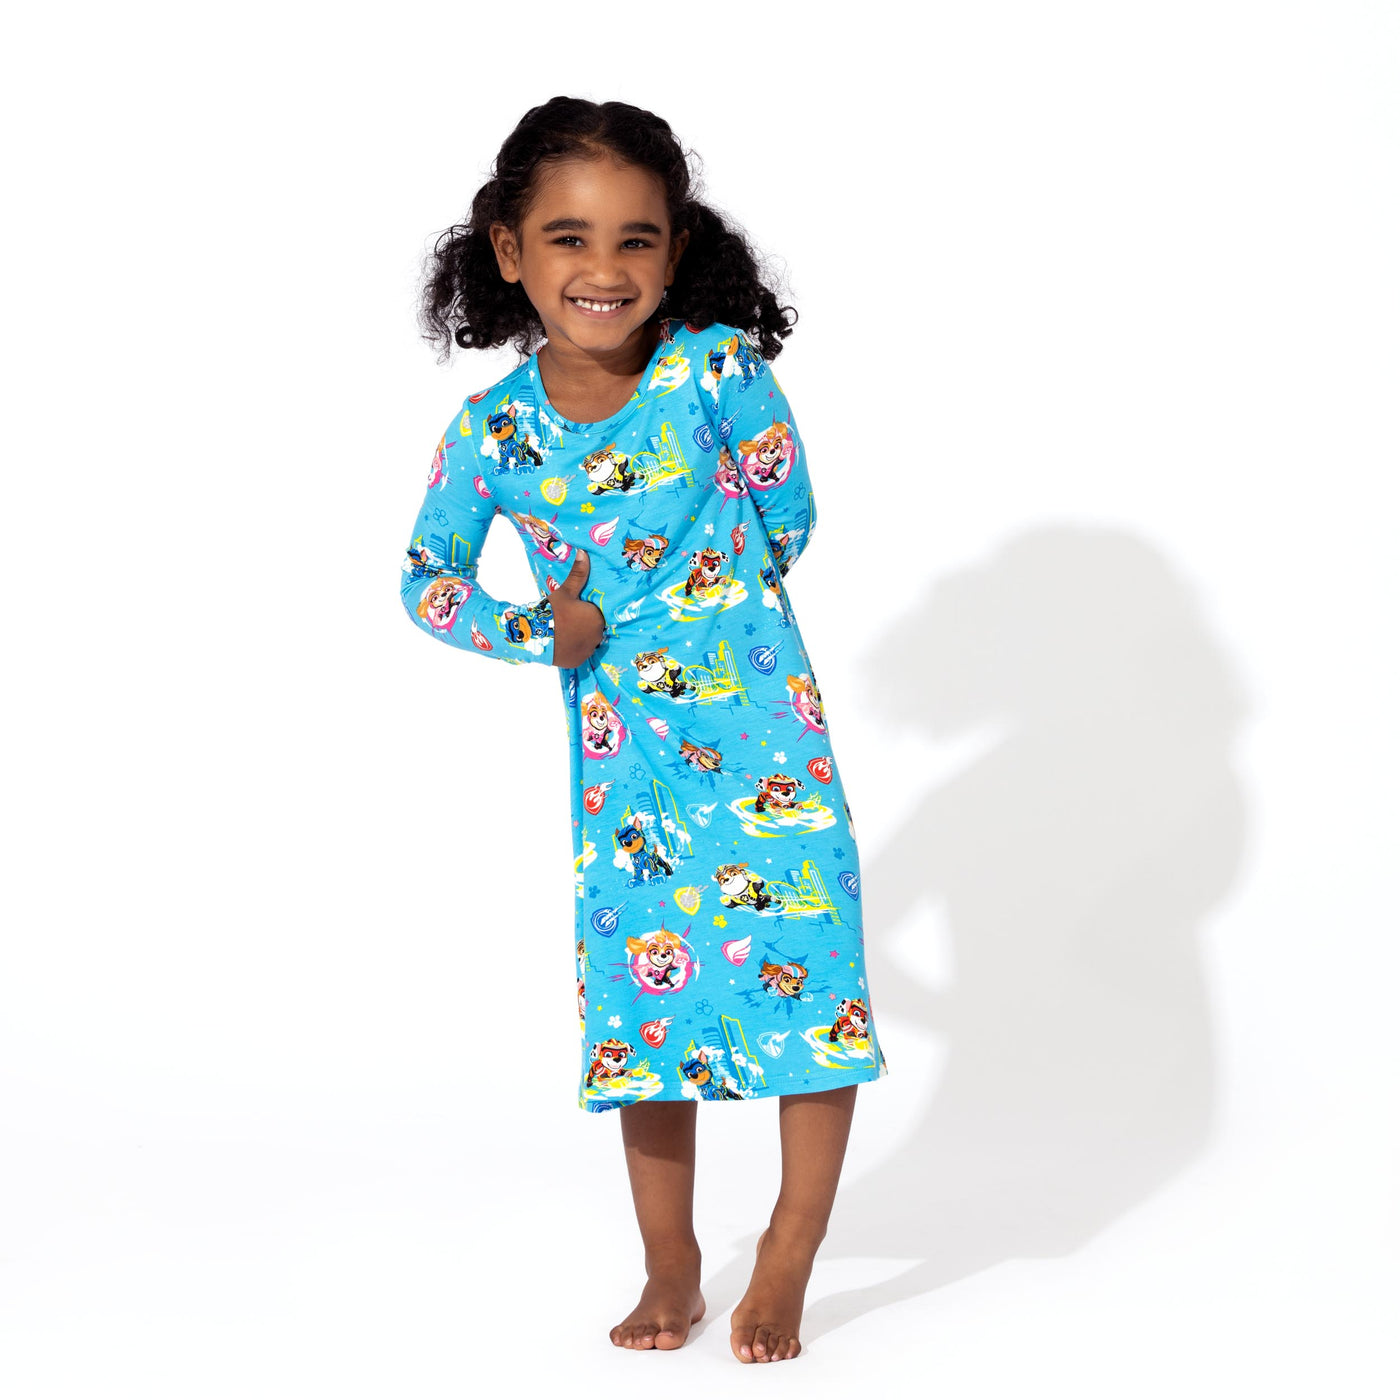 PAW Patrol: The Mighty Movie - Mighty Pups Bamboo Girls' Dress